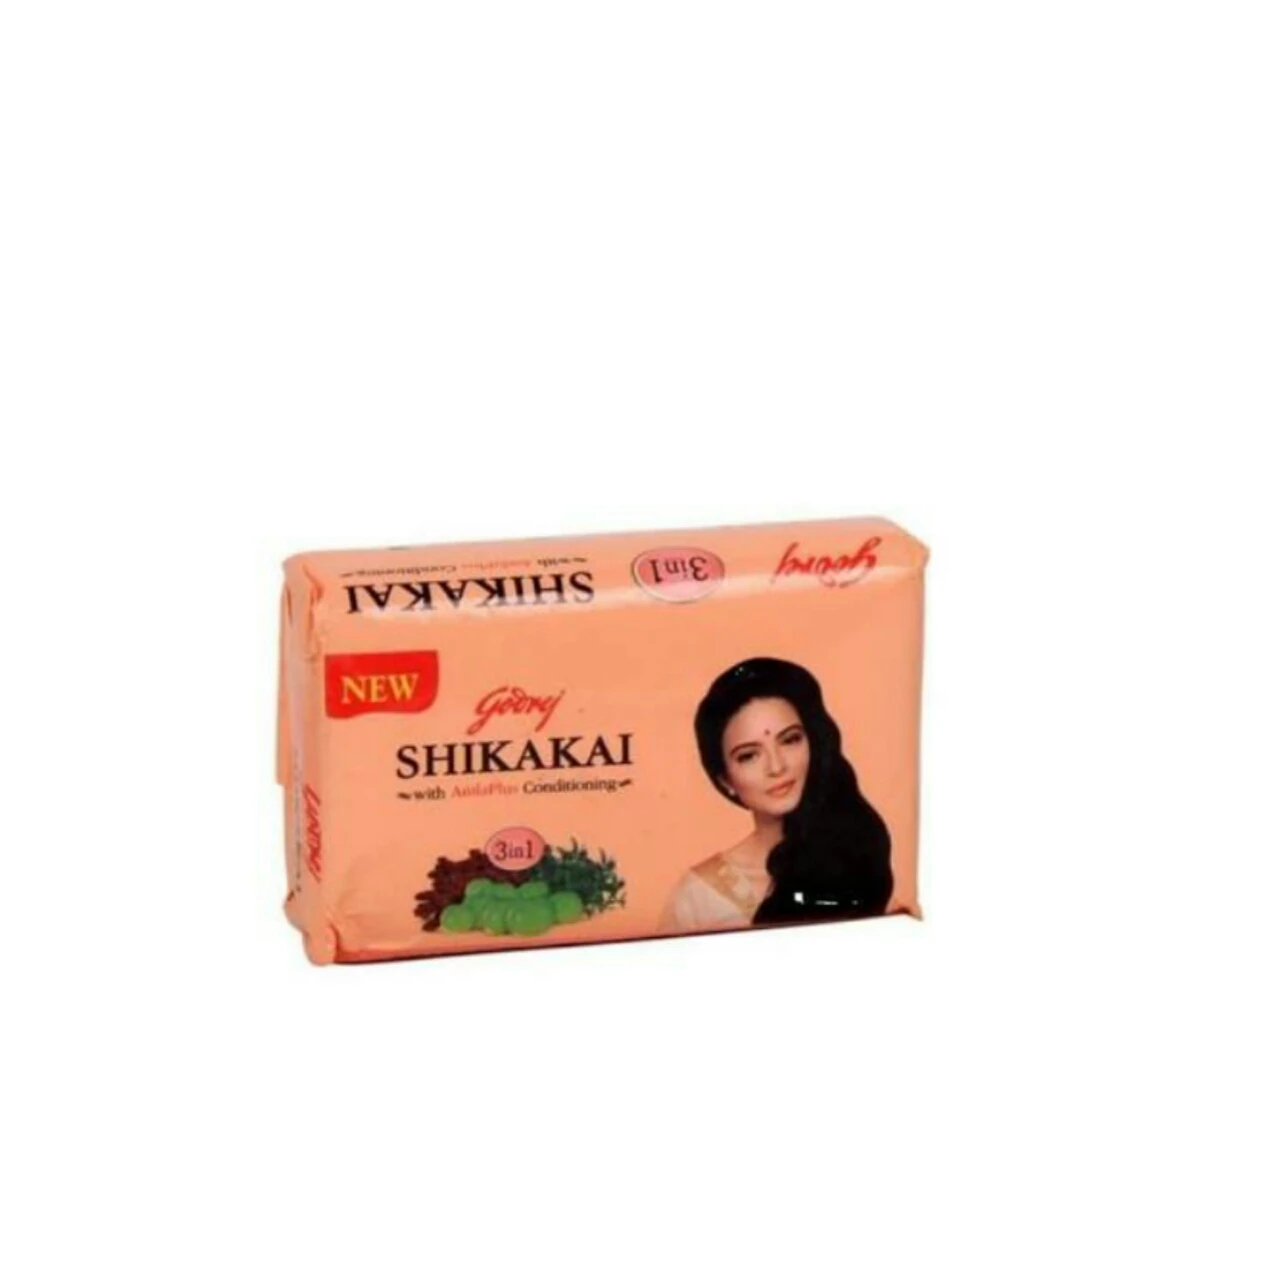 Shikaki Ayurvedic Soap For All Type Of Hair - Buy Shikakai Soap With Amla  Plus Conditioning For Long Hair,Amla Soap Natural Shine Your Hair Well  Conditoned Look & Bhringraj Soap Nourishes Hair